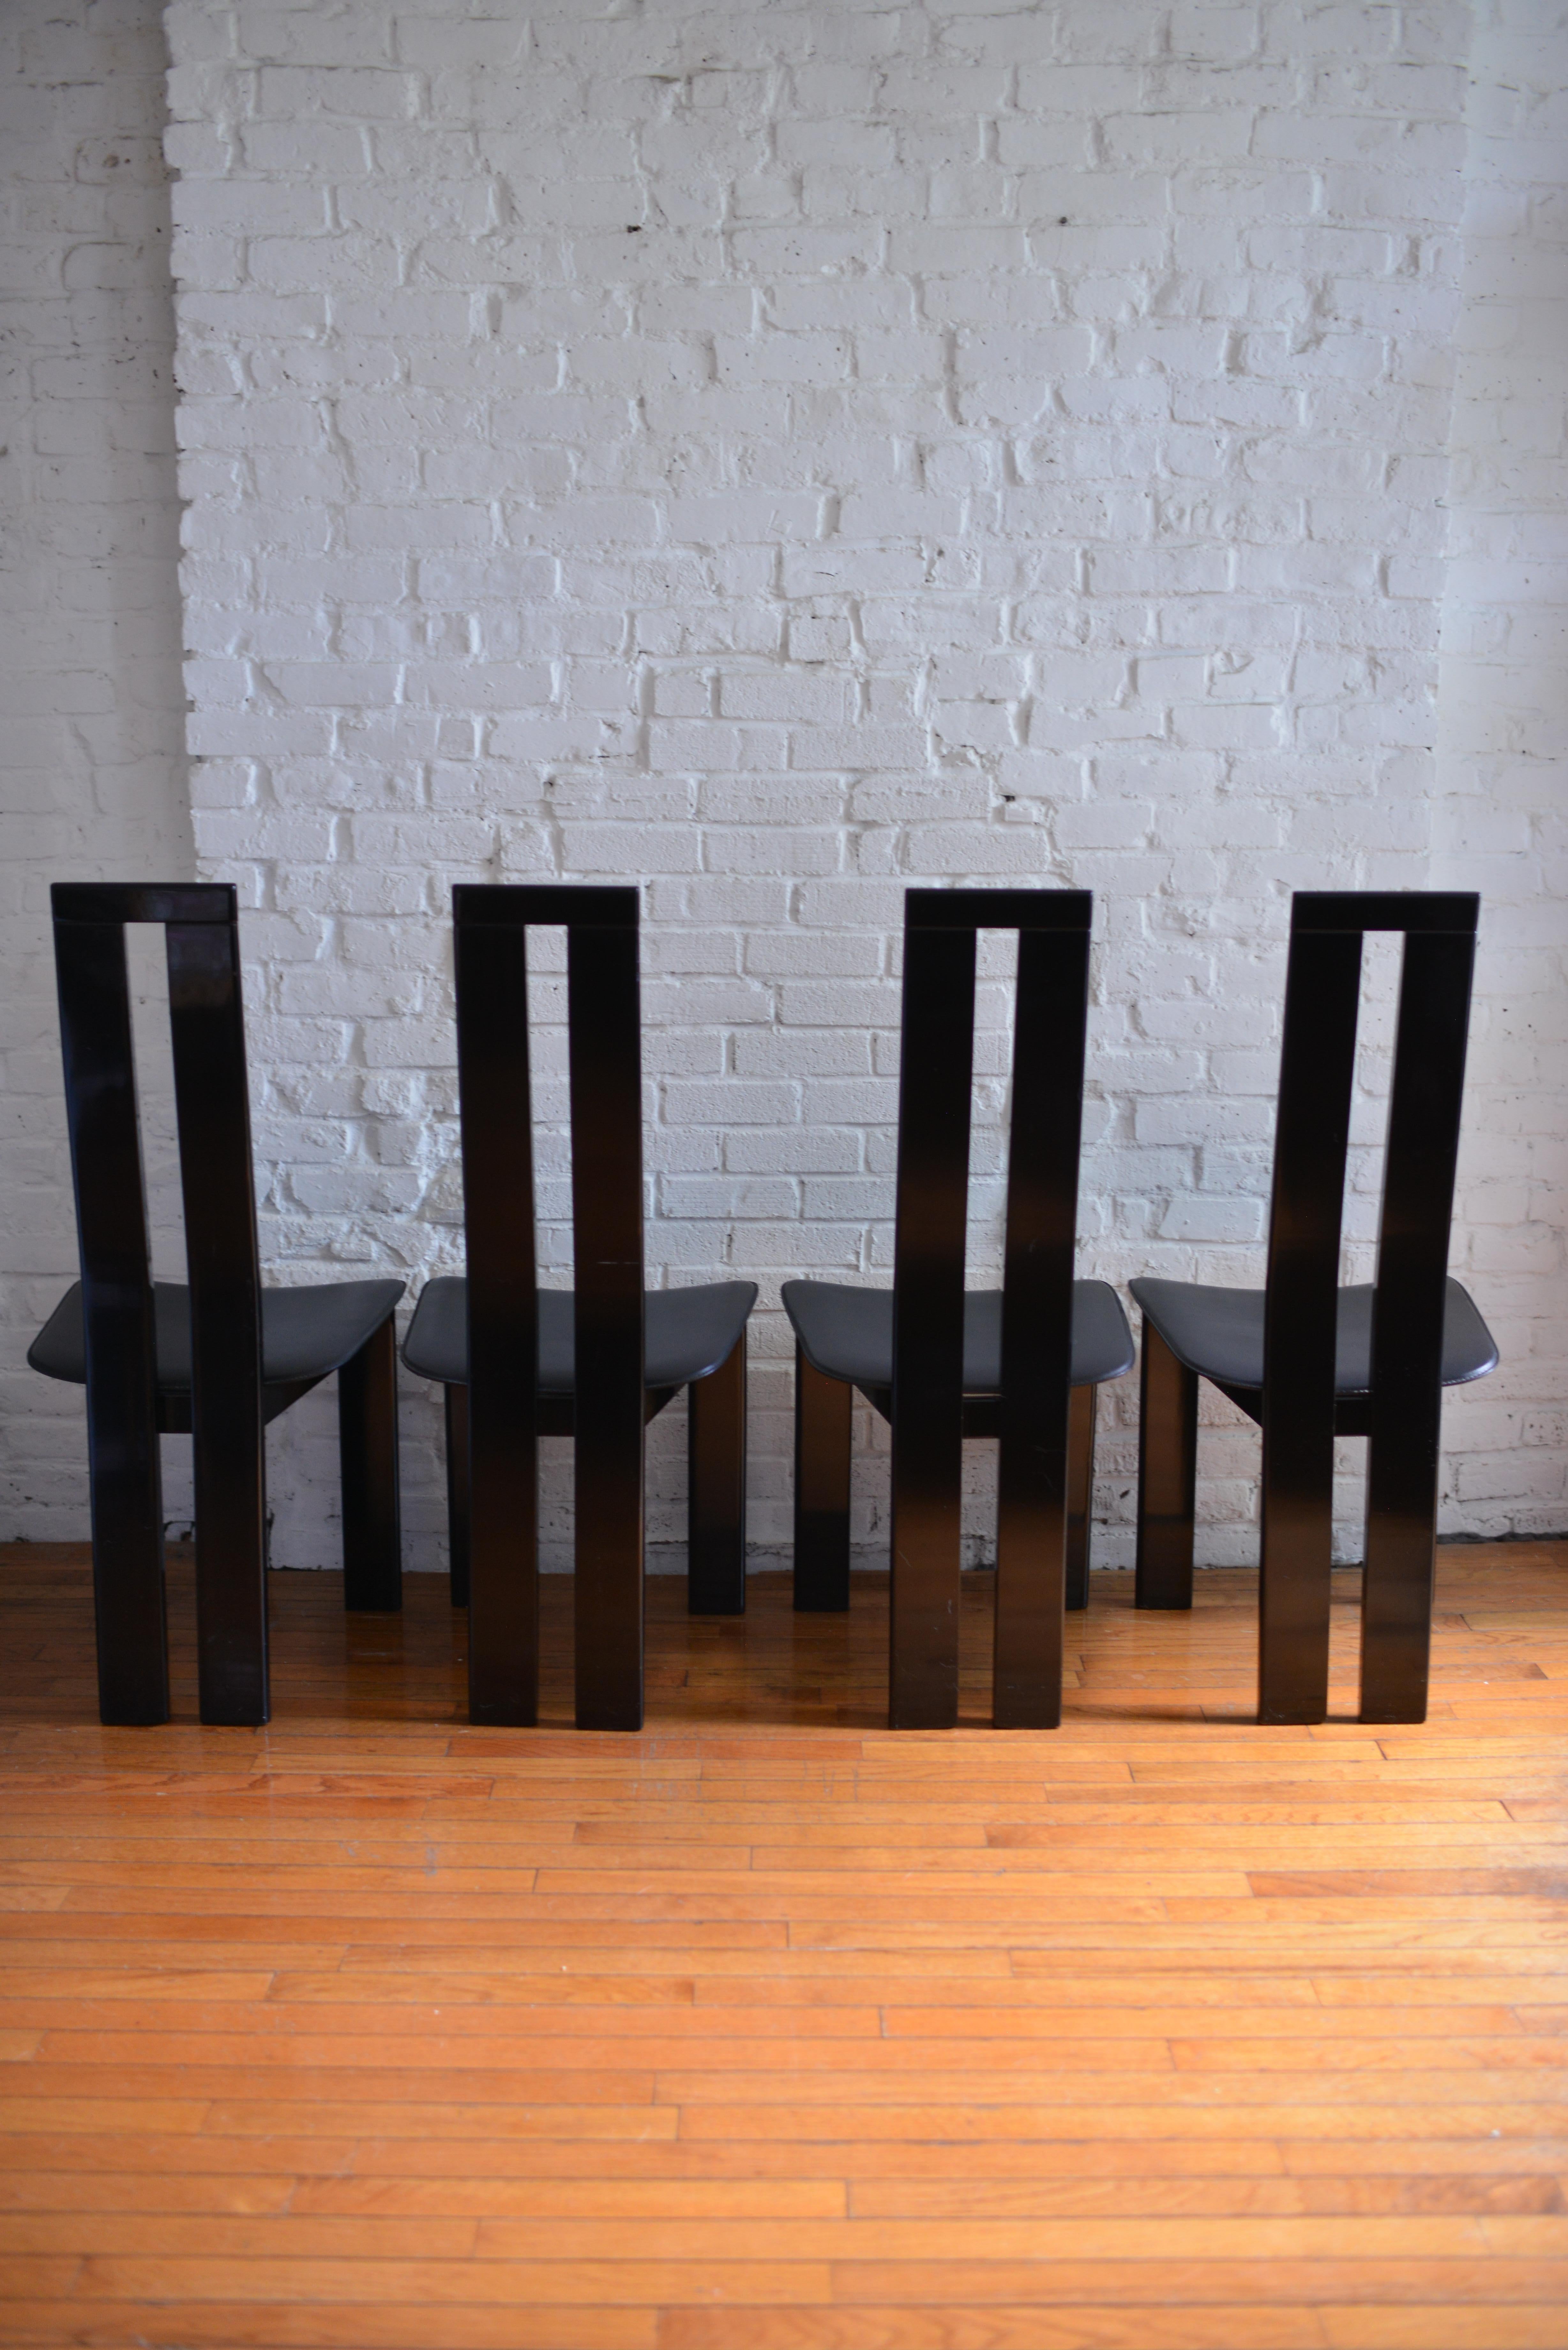 Set of four dining chairs designed by Pietro Costantini for Ello. The chairs feature black lacquered wood, a sculptural piano back and stitched black saddle leather seats. The chairs are highly comfortable with their slightly scooped seats. Made in